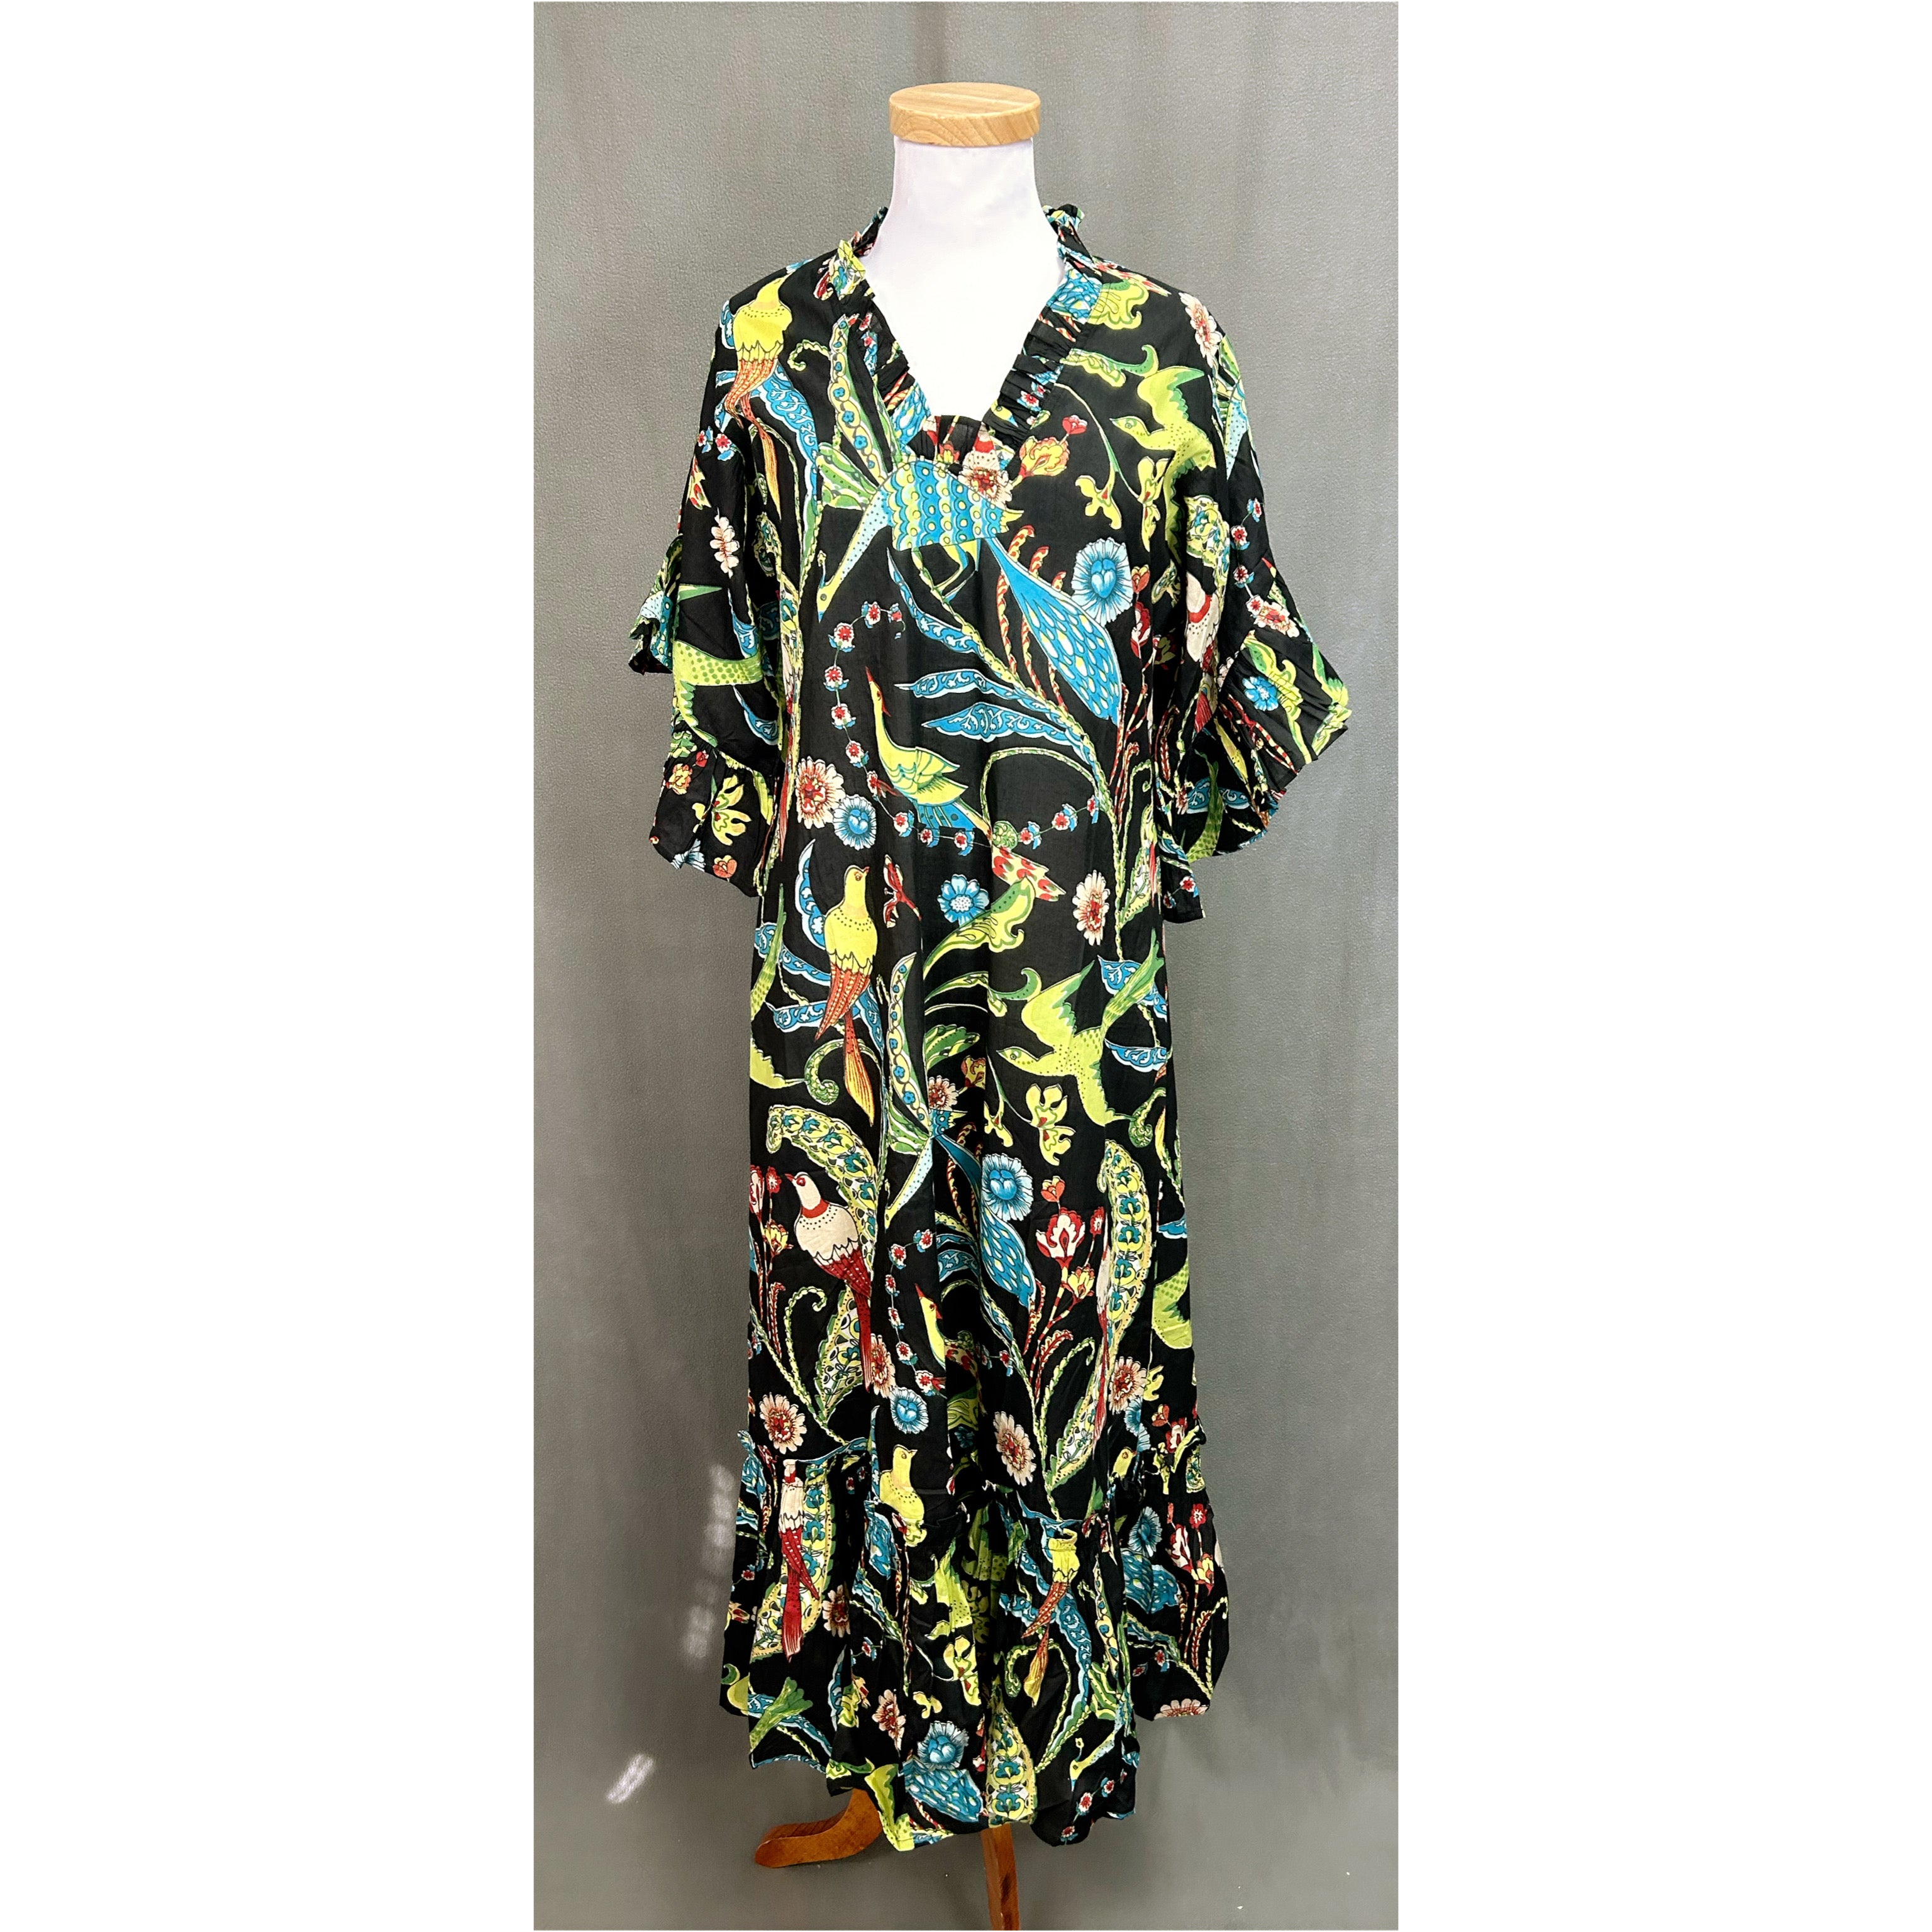 Fitzroy & Willa black print dress, size S, NEW WITH TAGS!